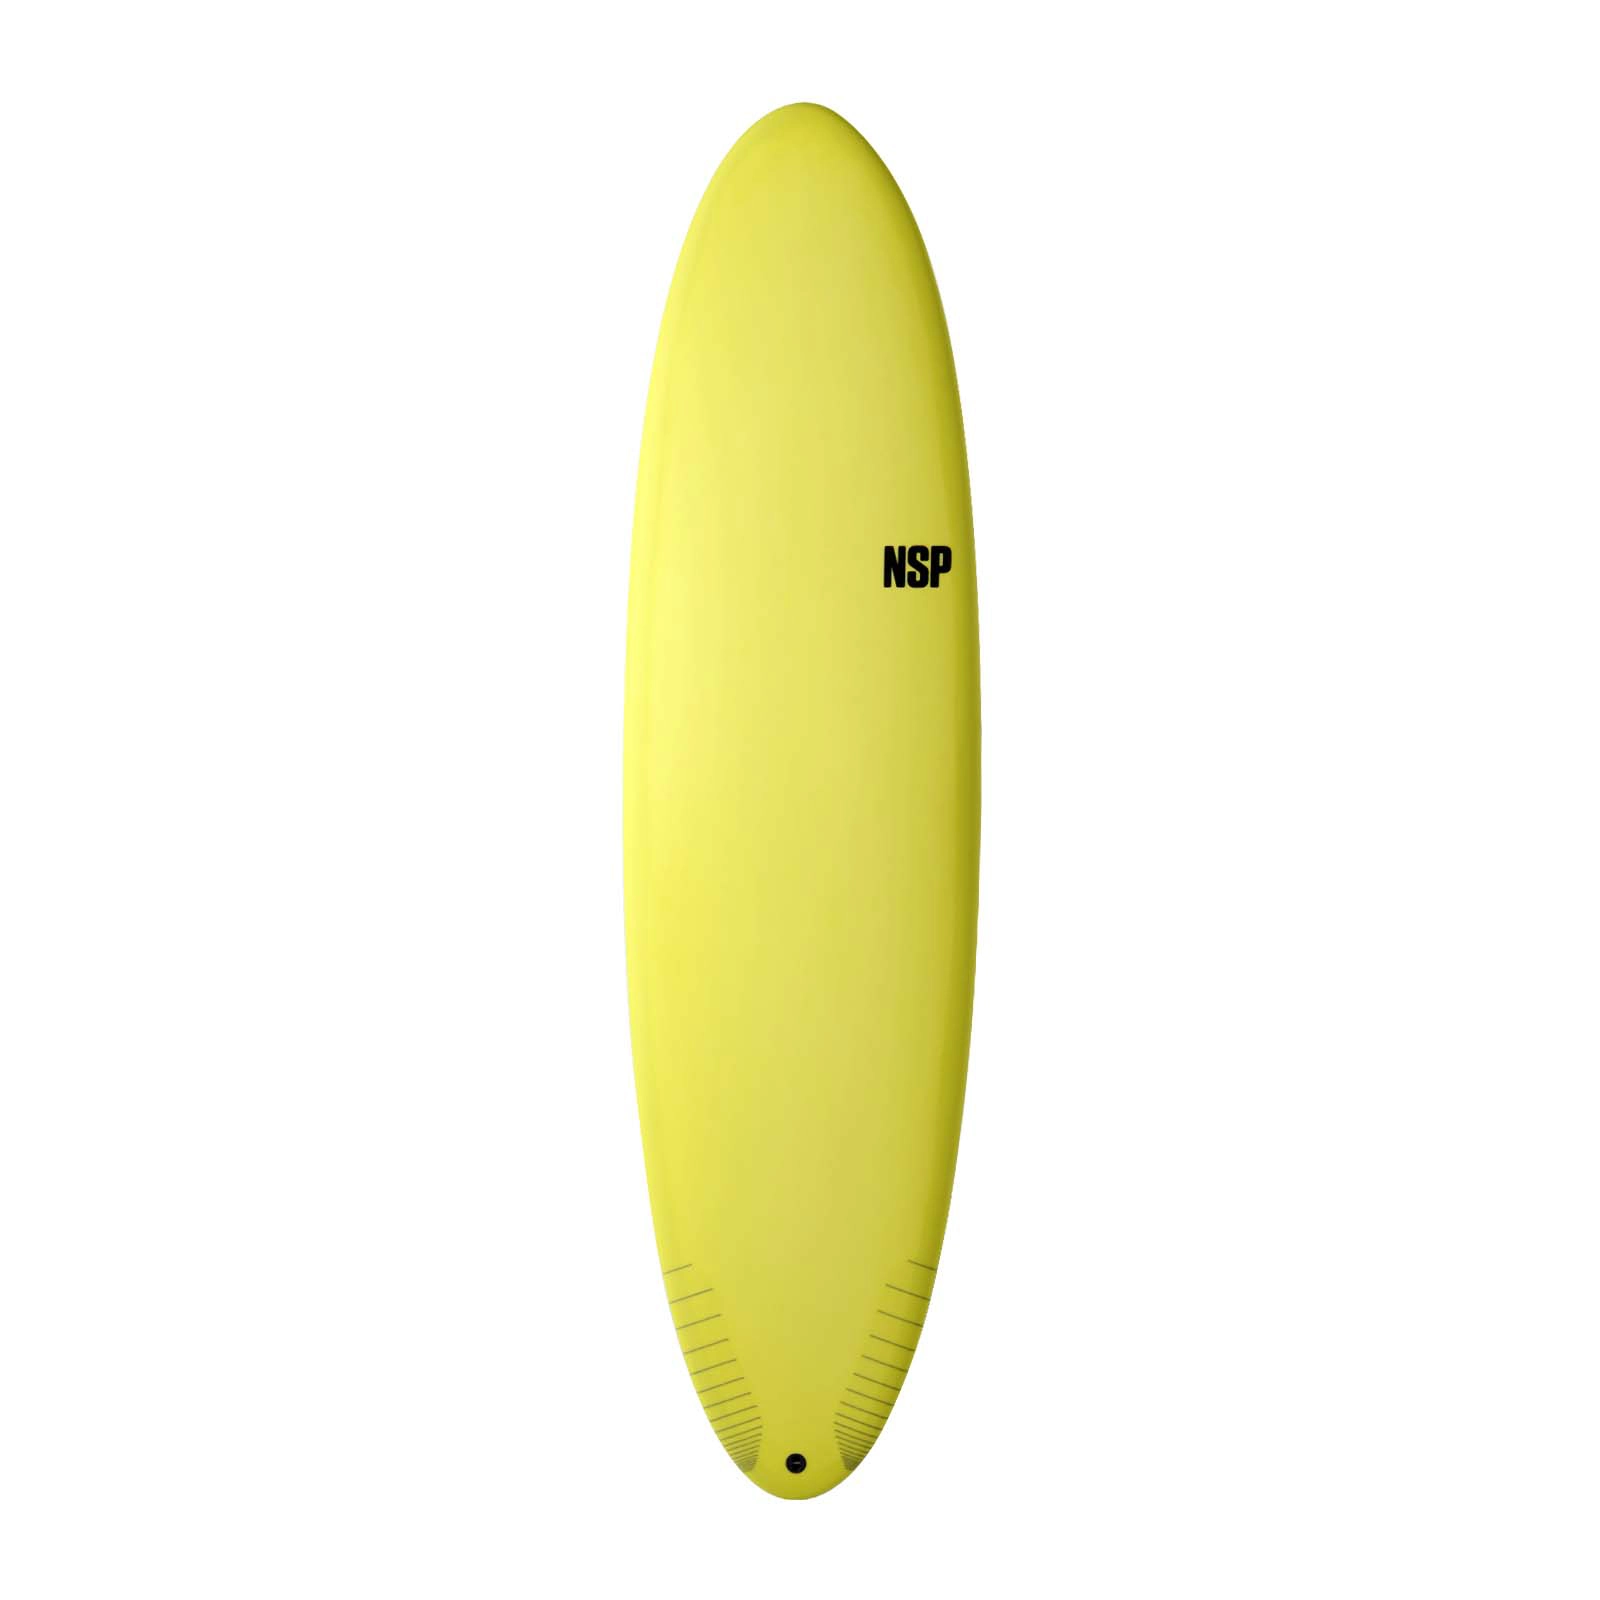 The Funboard Protech - Shaped by NSP Surfboards